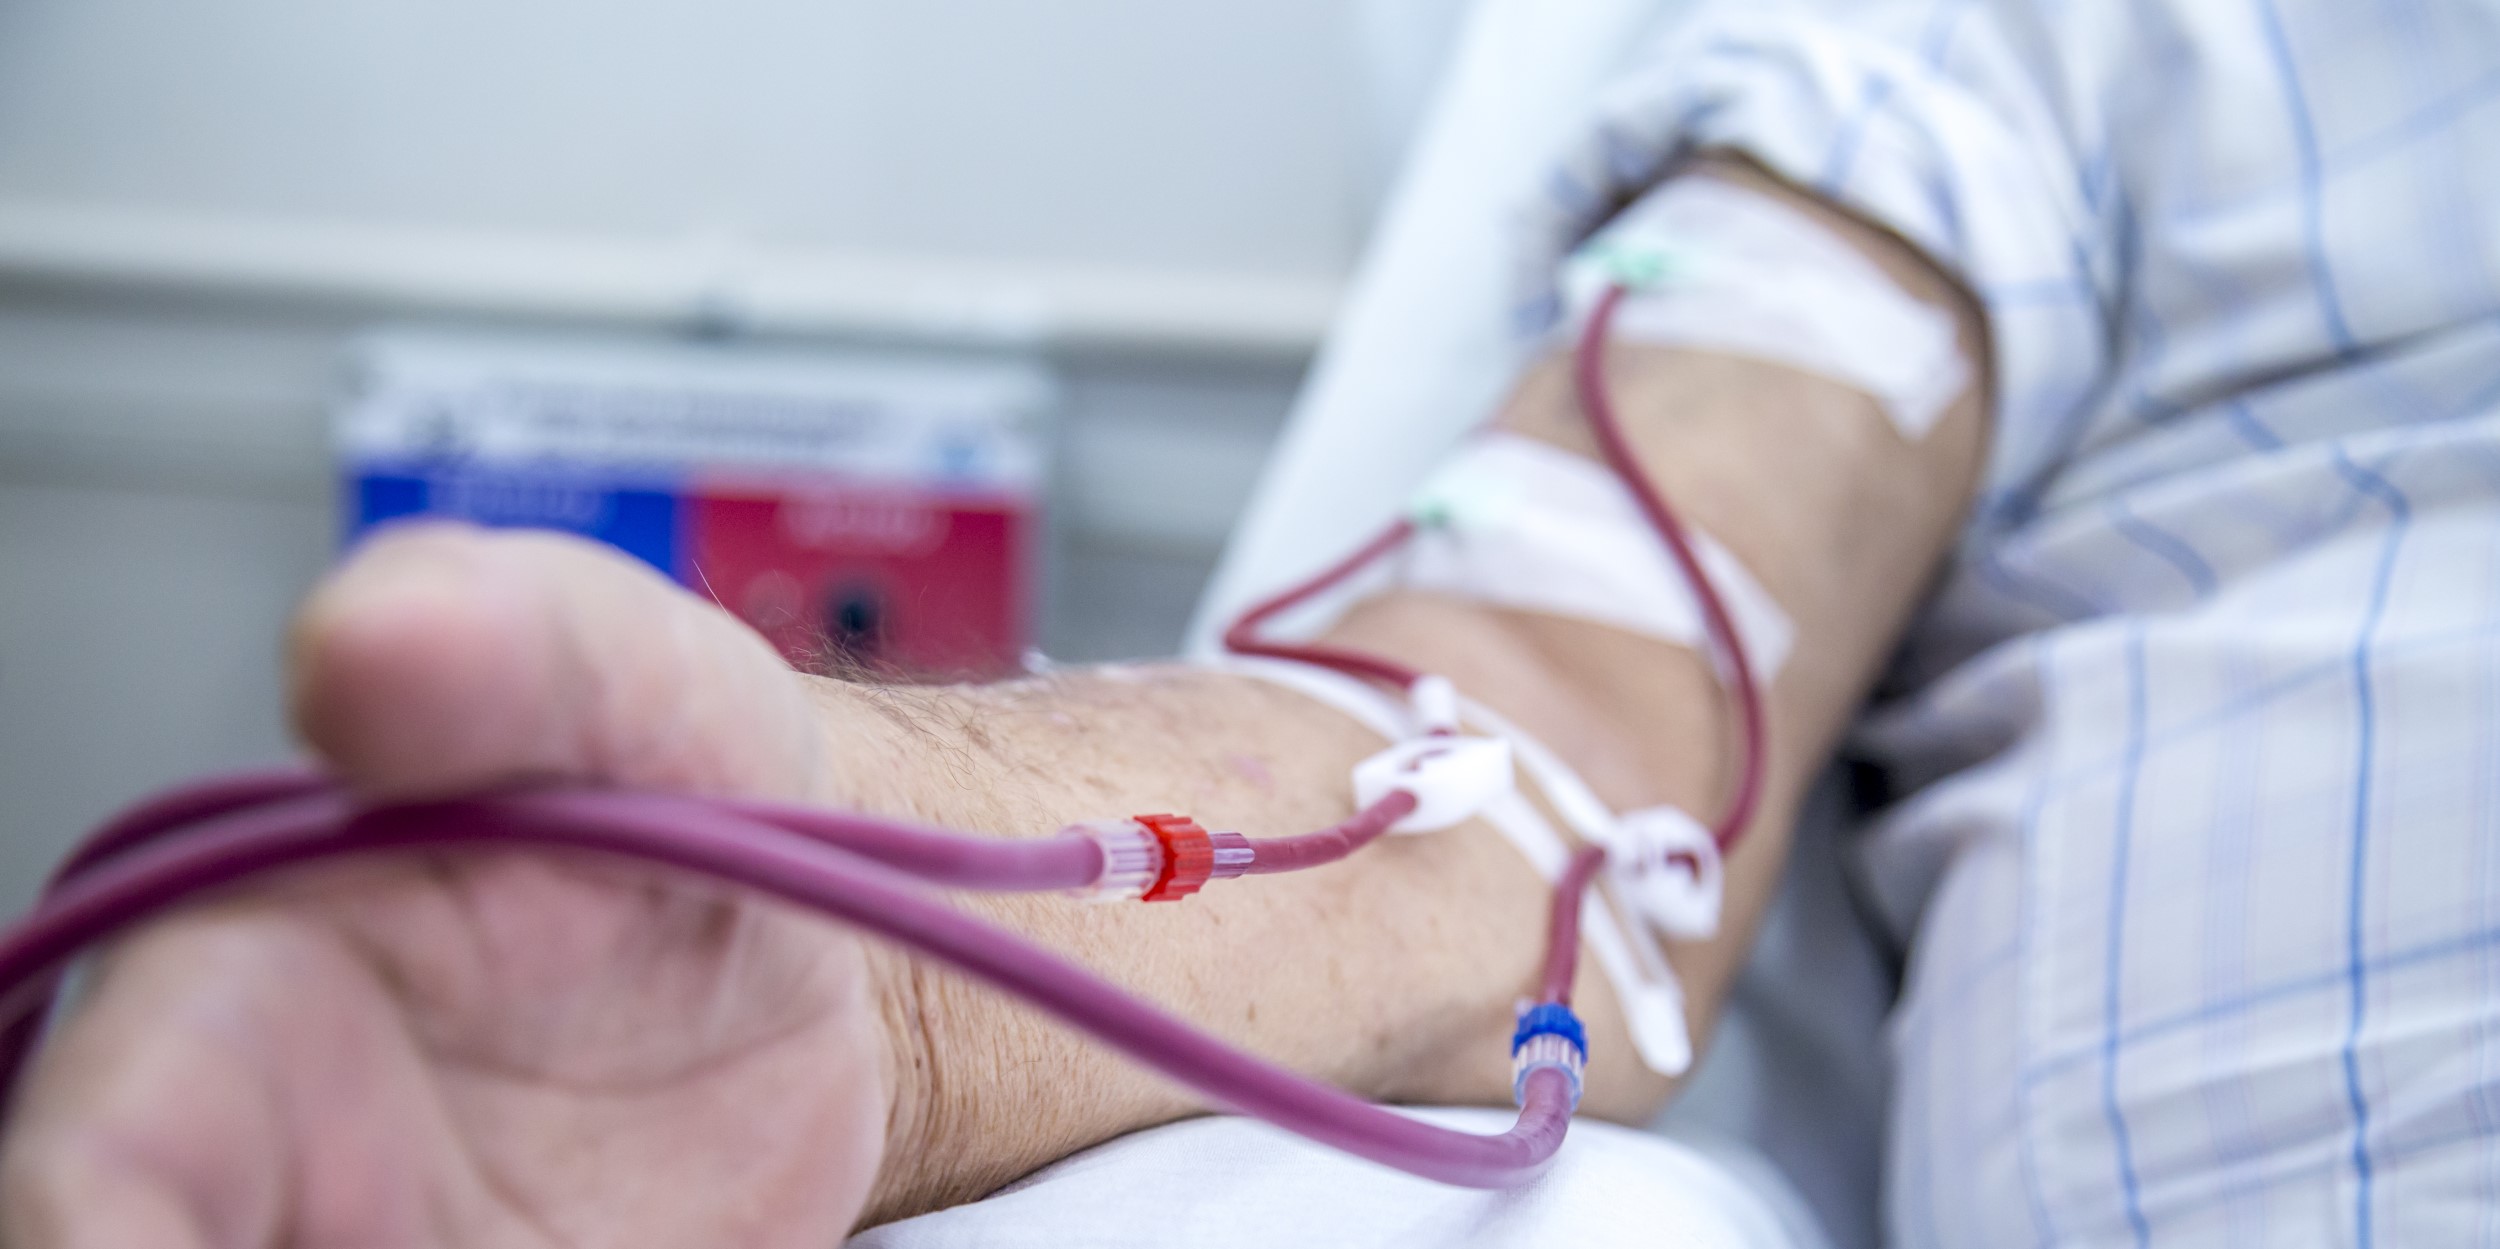 What is Dialysis and When do I Start?